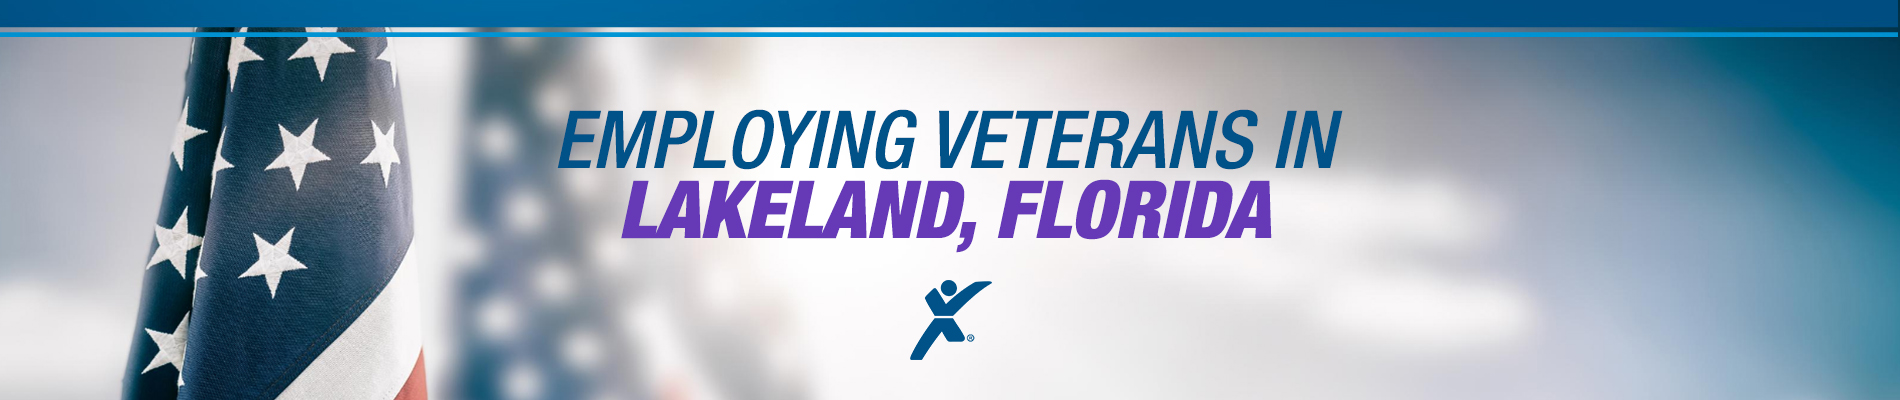 Express Has Work for Vets in Lakeland, FL - Polk County Jobs